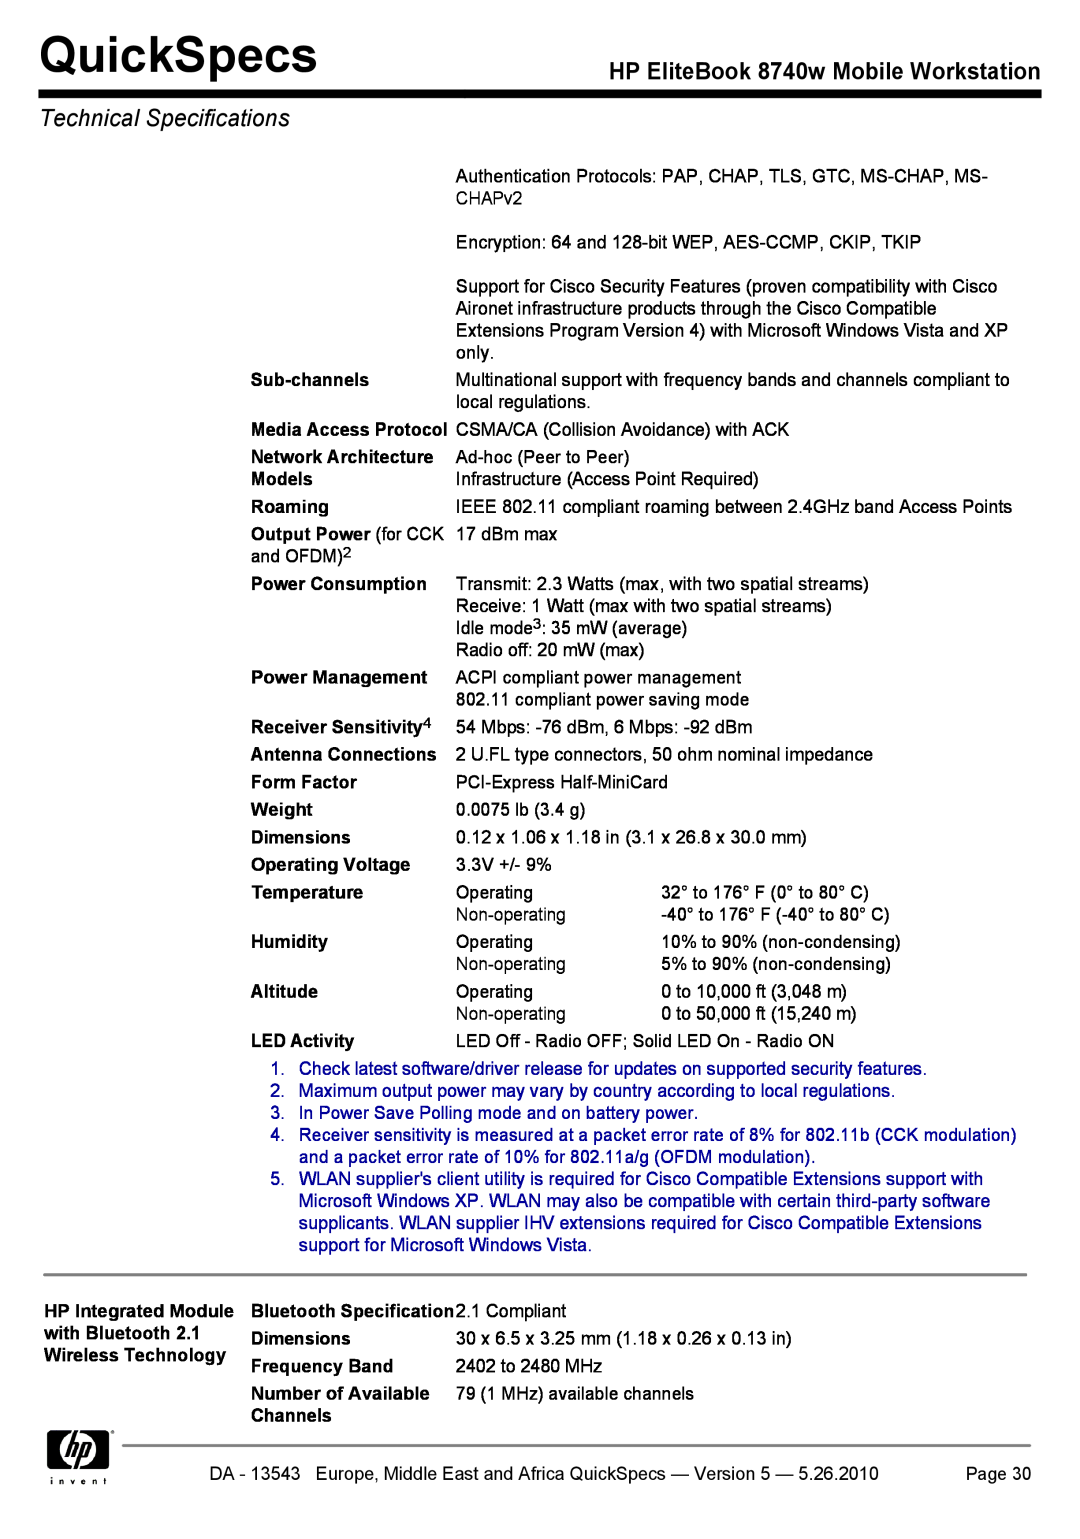 HP manual QuickSpecs, HP EliteBook 8740w Mobile Workstation, Technical Specifications 